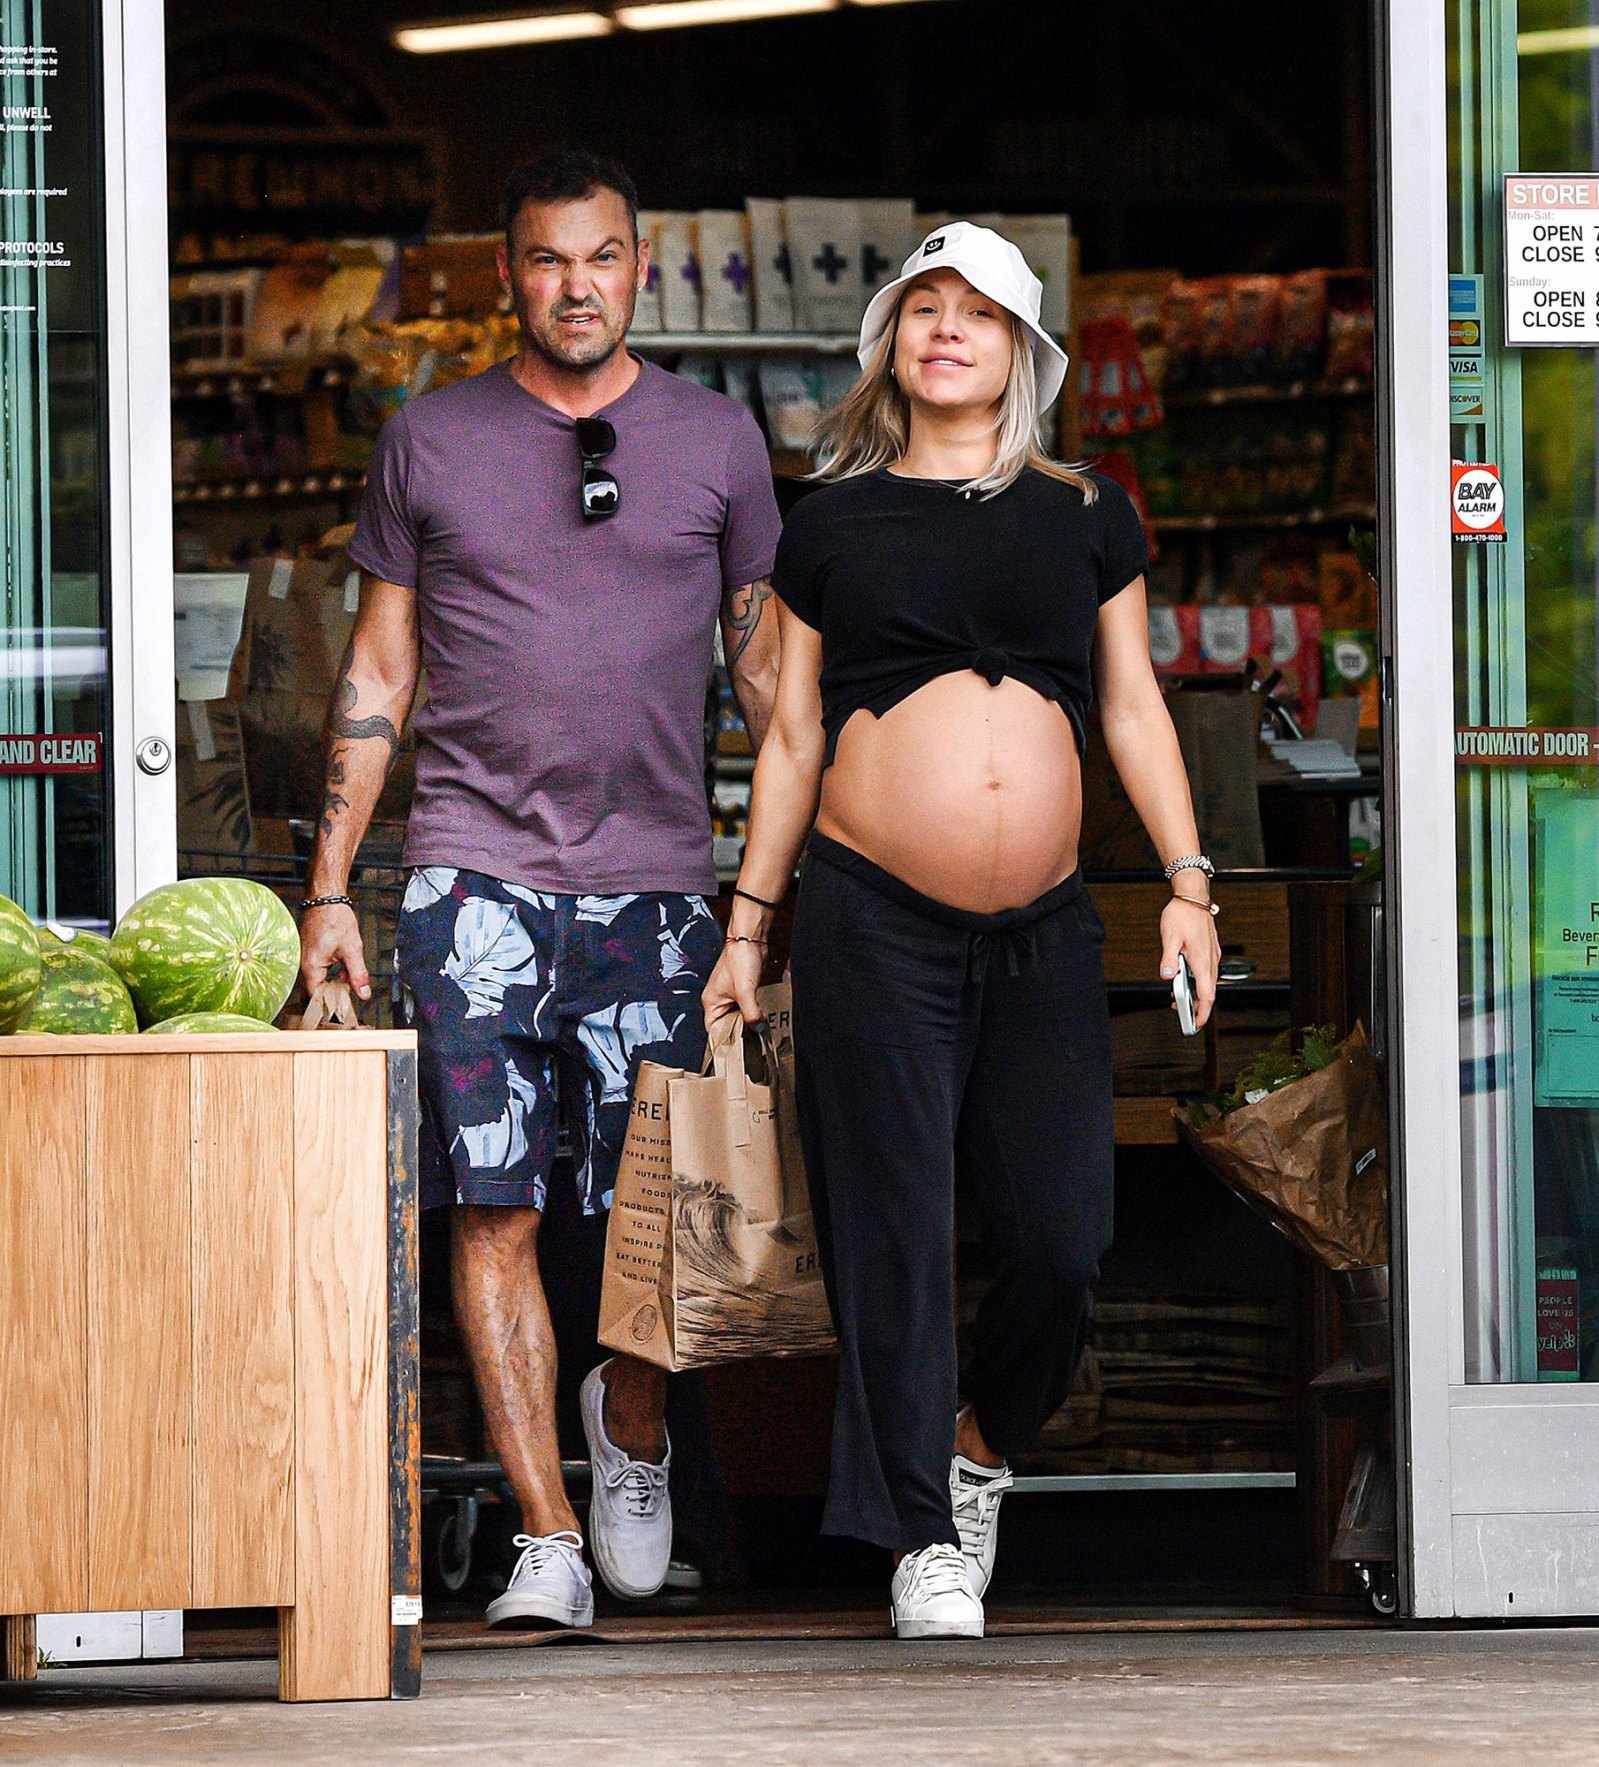 Pregnant Sharna Burgess Shows Off Bare Baby Bump During Outing With Brian Austin Green